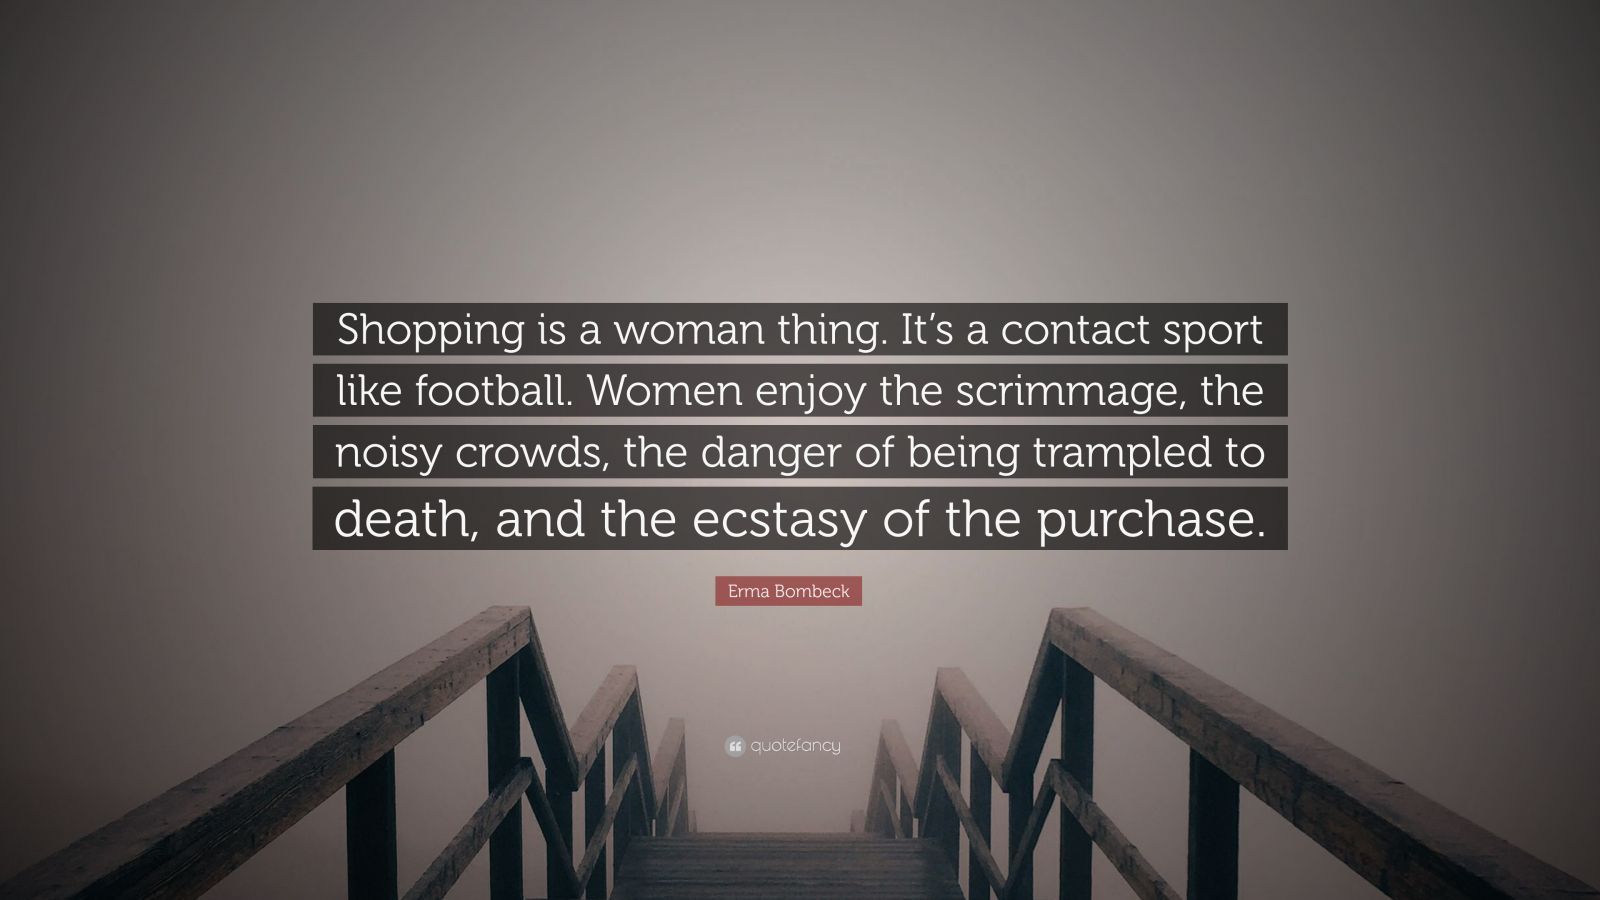 Shopping is being treated like a sport by women